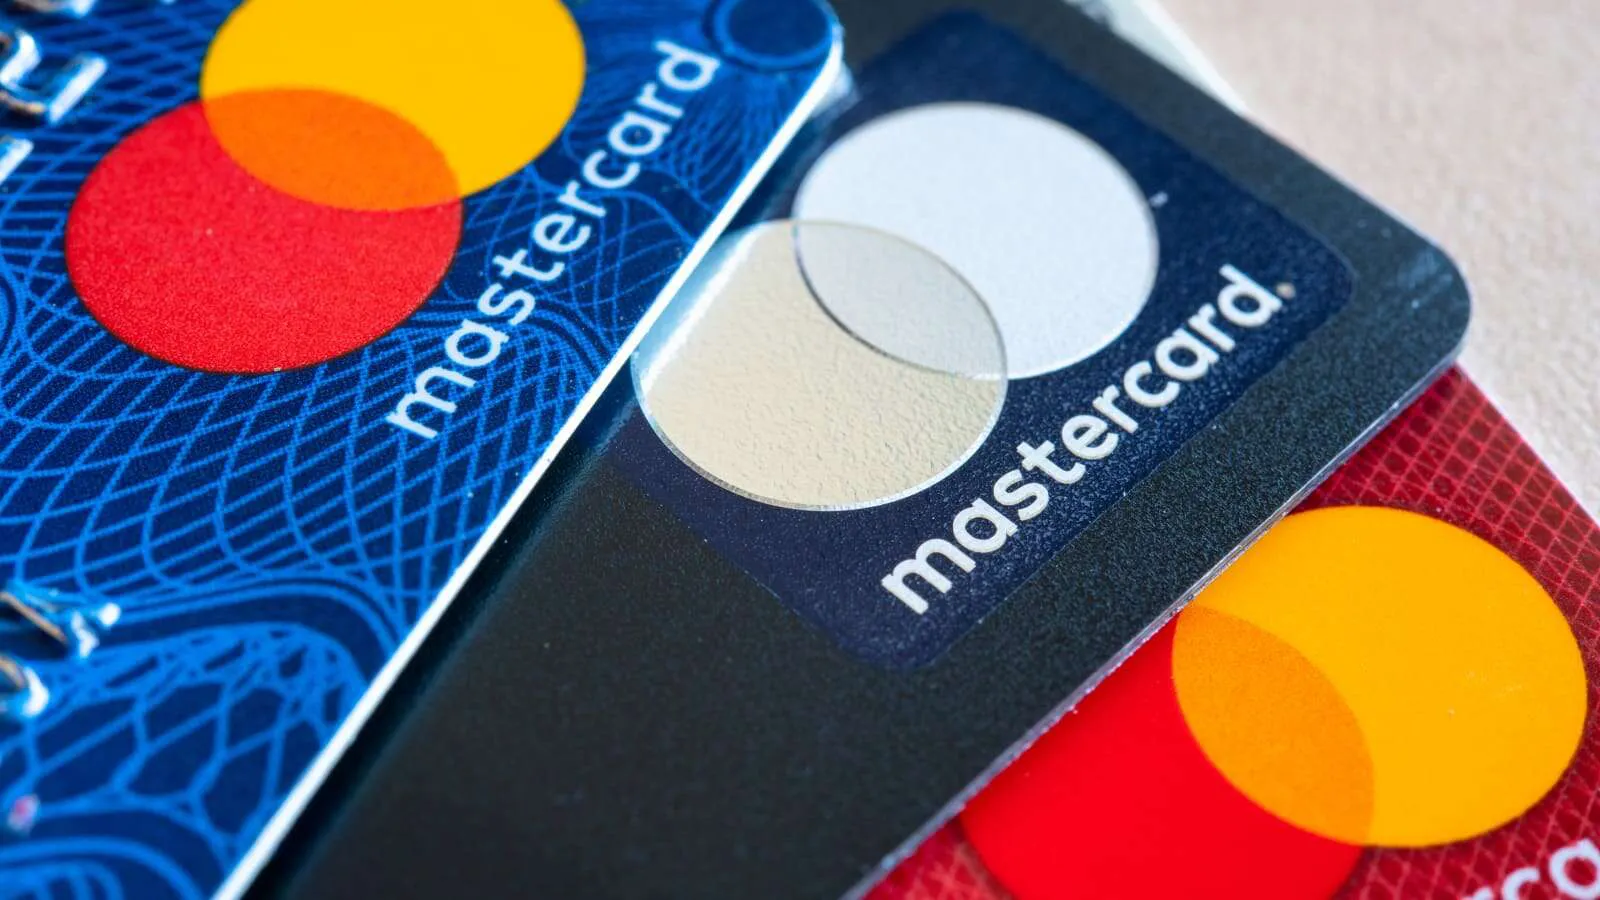 Mastercard is planning to adopt crypto currency